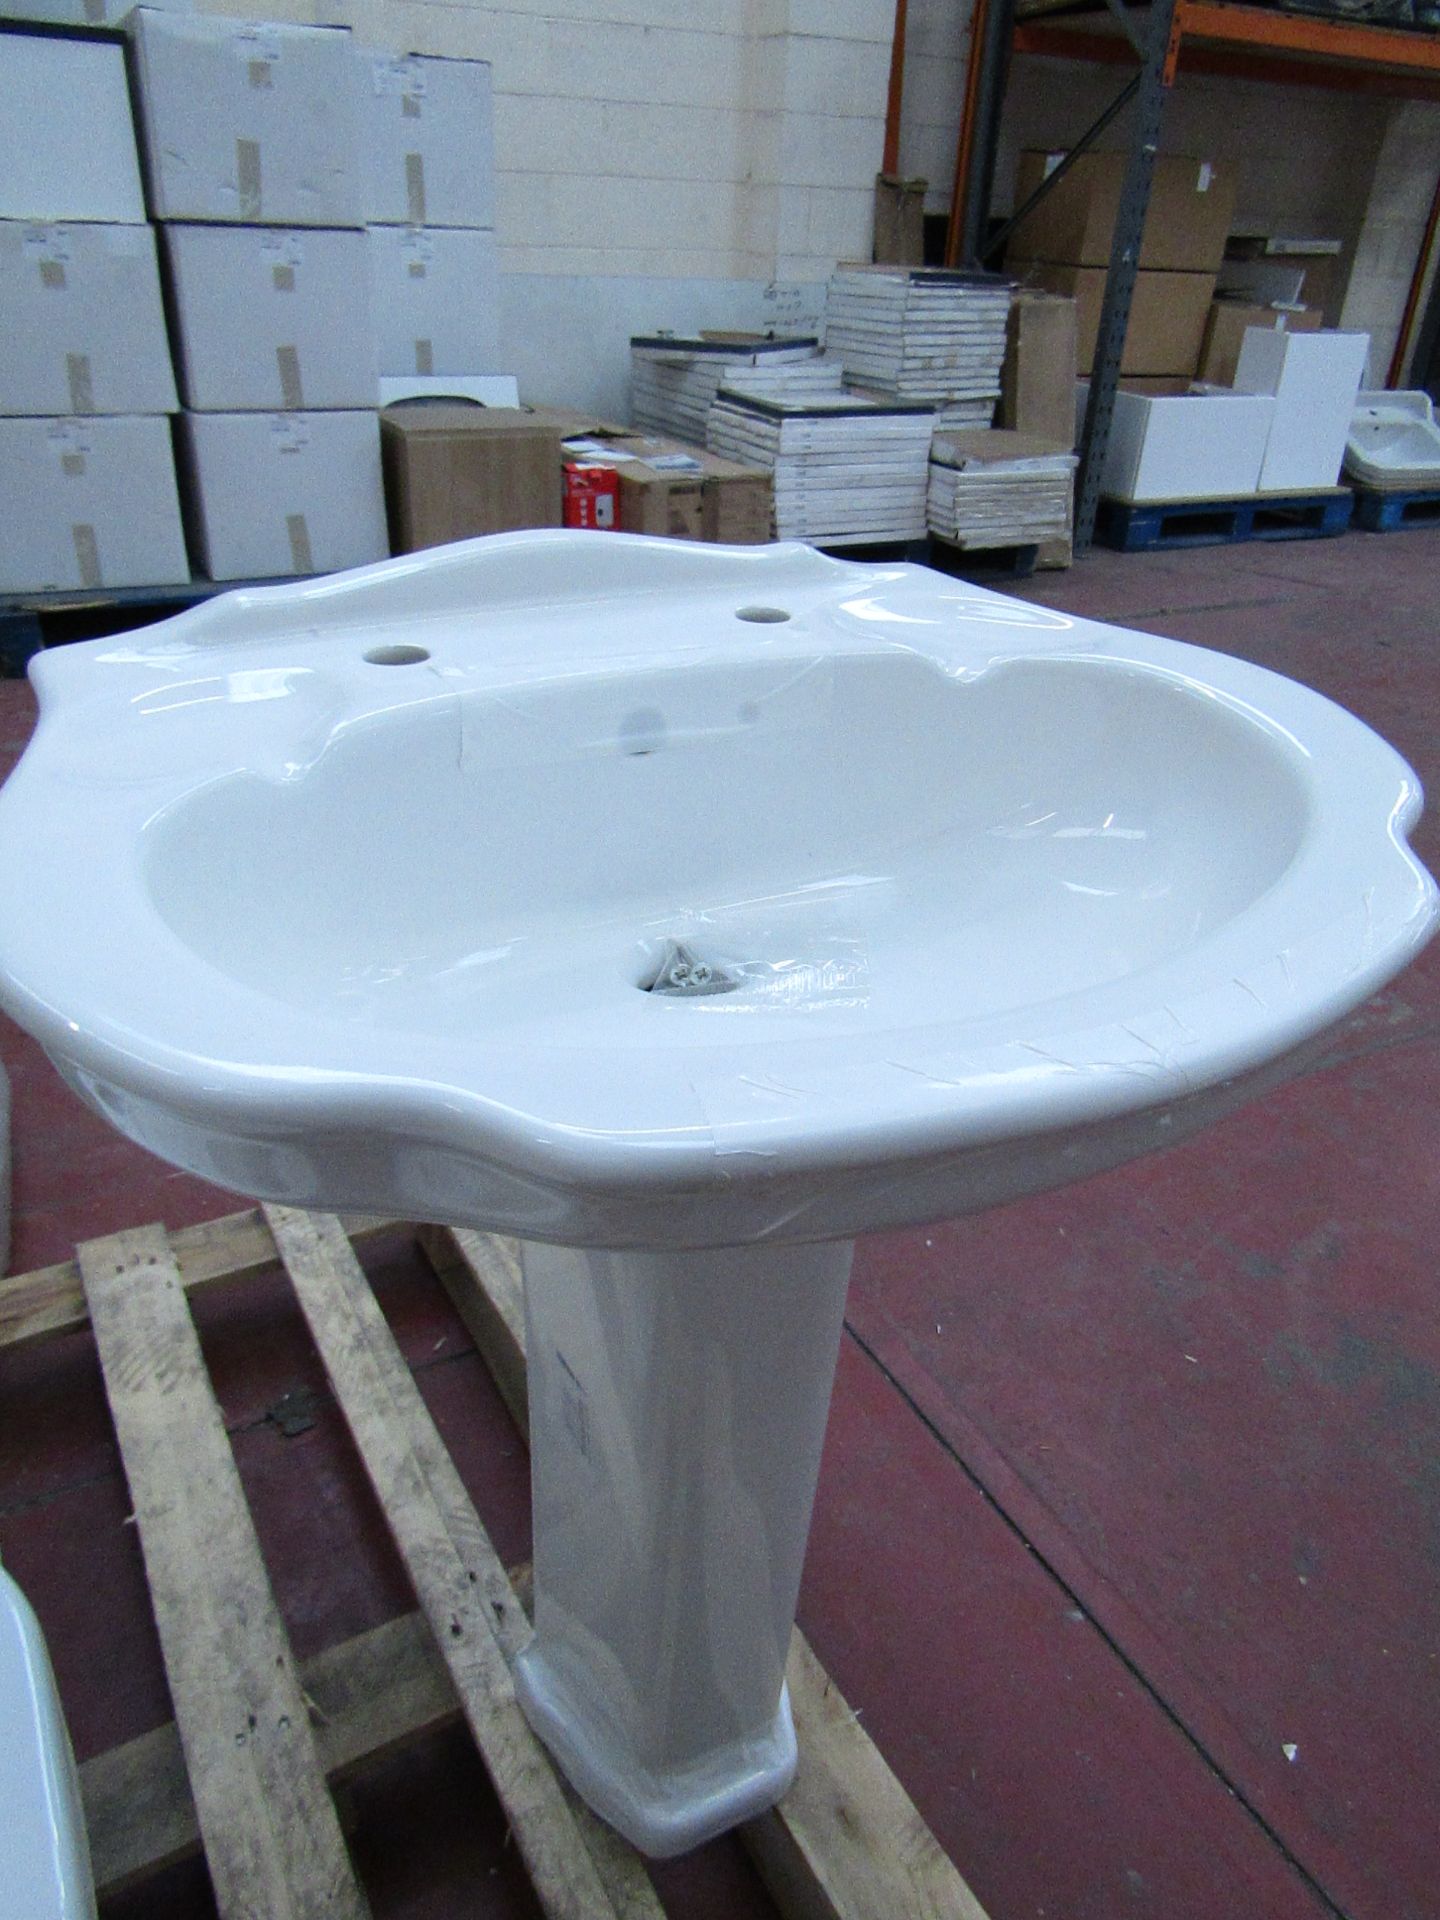 Jersey Bathroom basin (2TH 600) and full pedestal set. New in packaging with fixings.